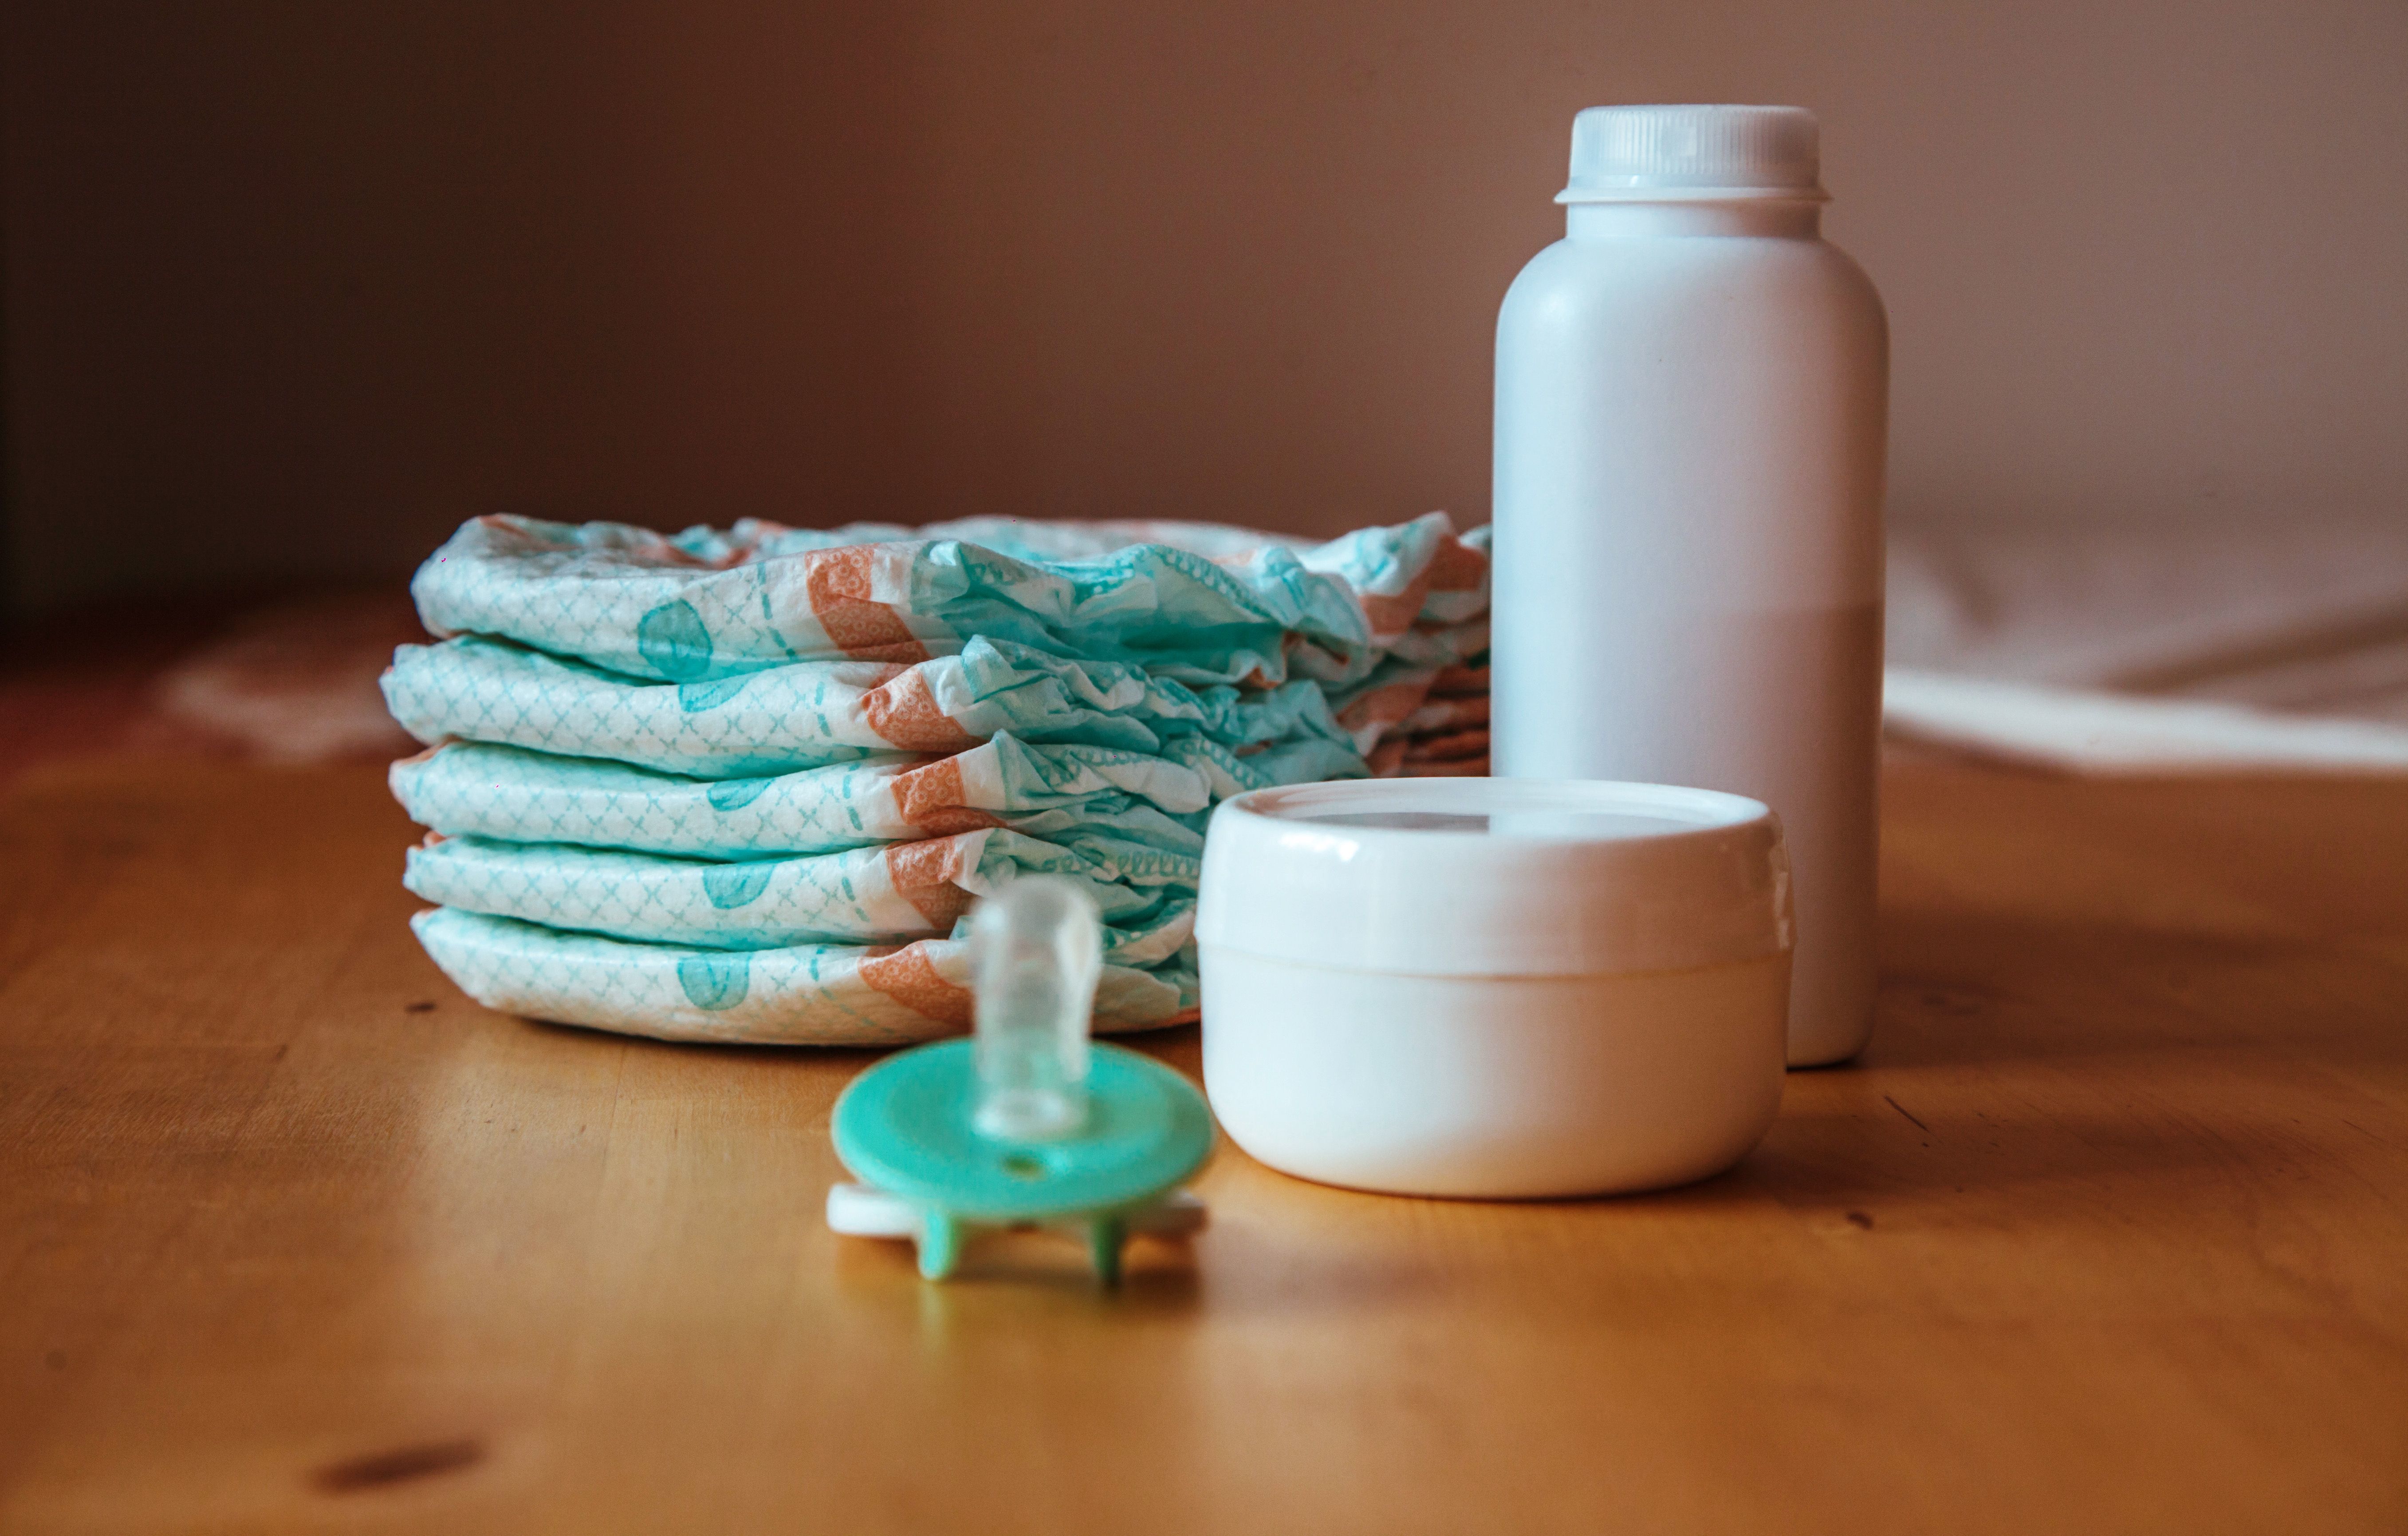 image of baby care products and stack of diapers